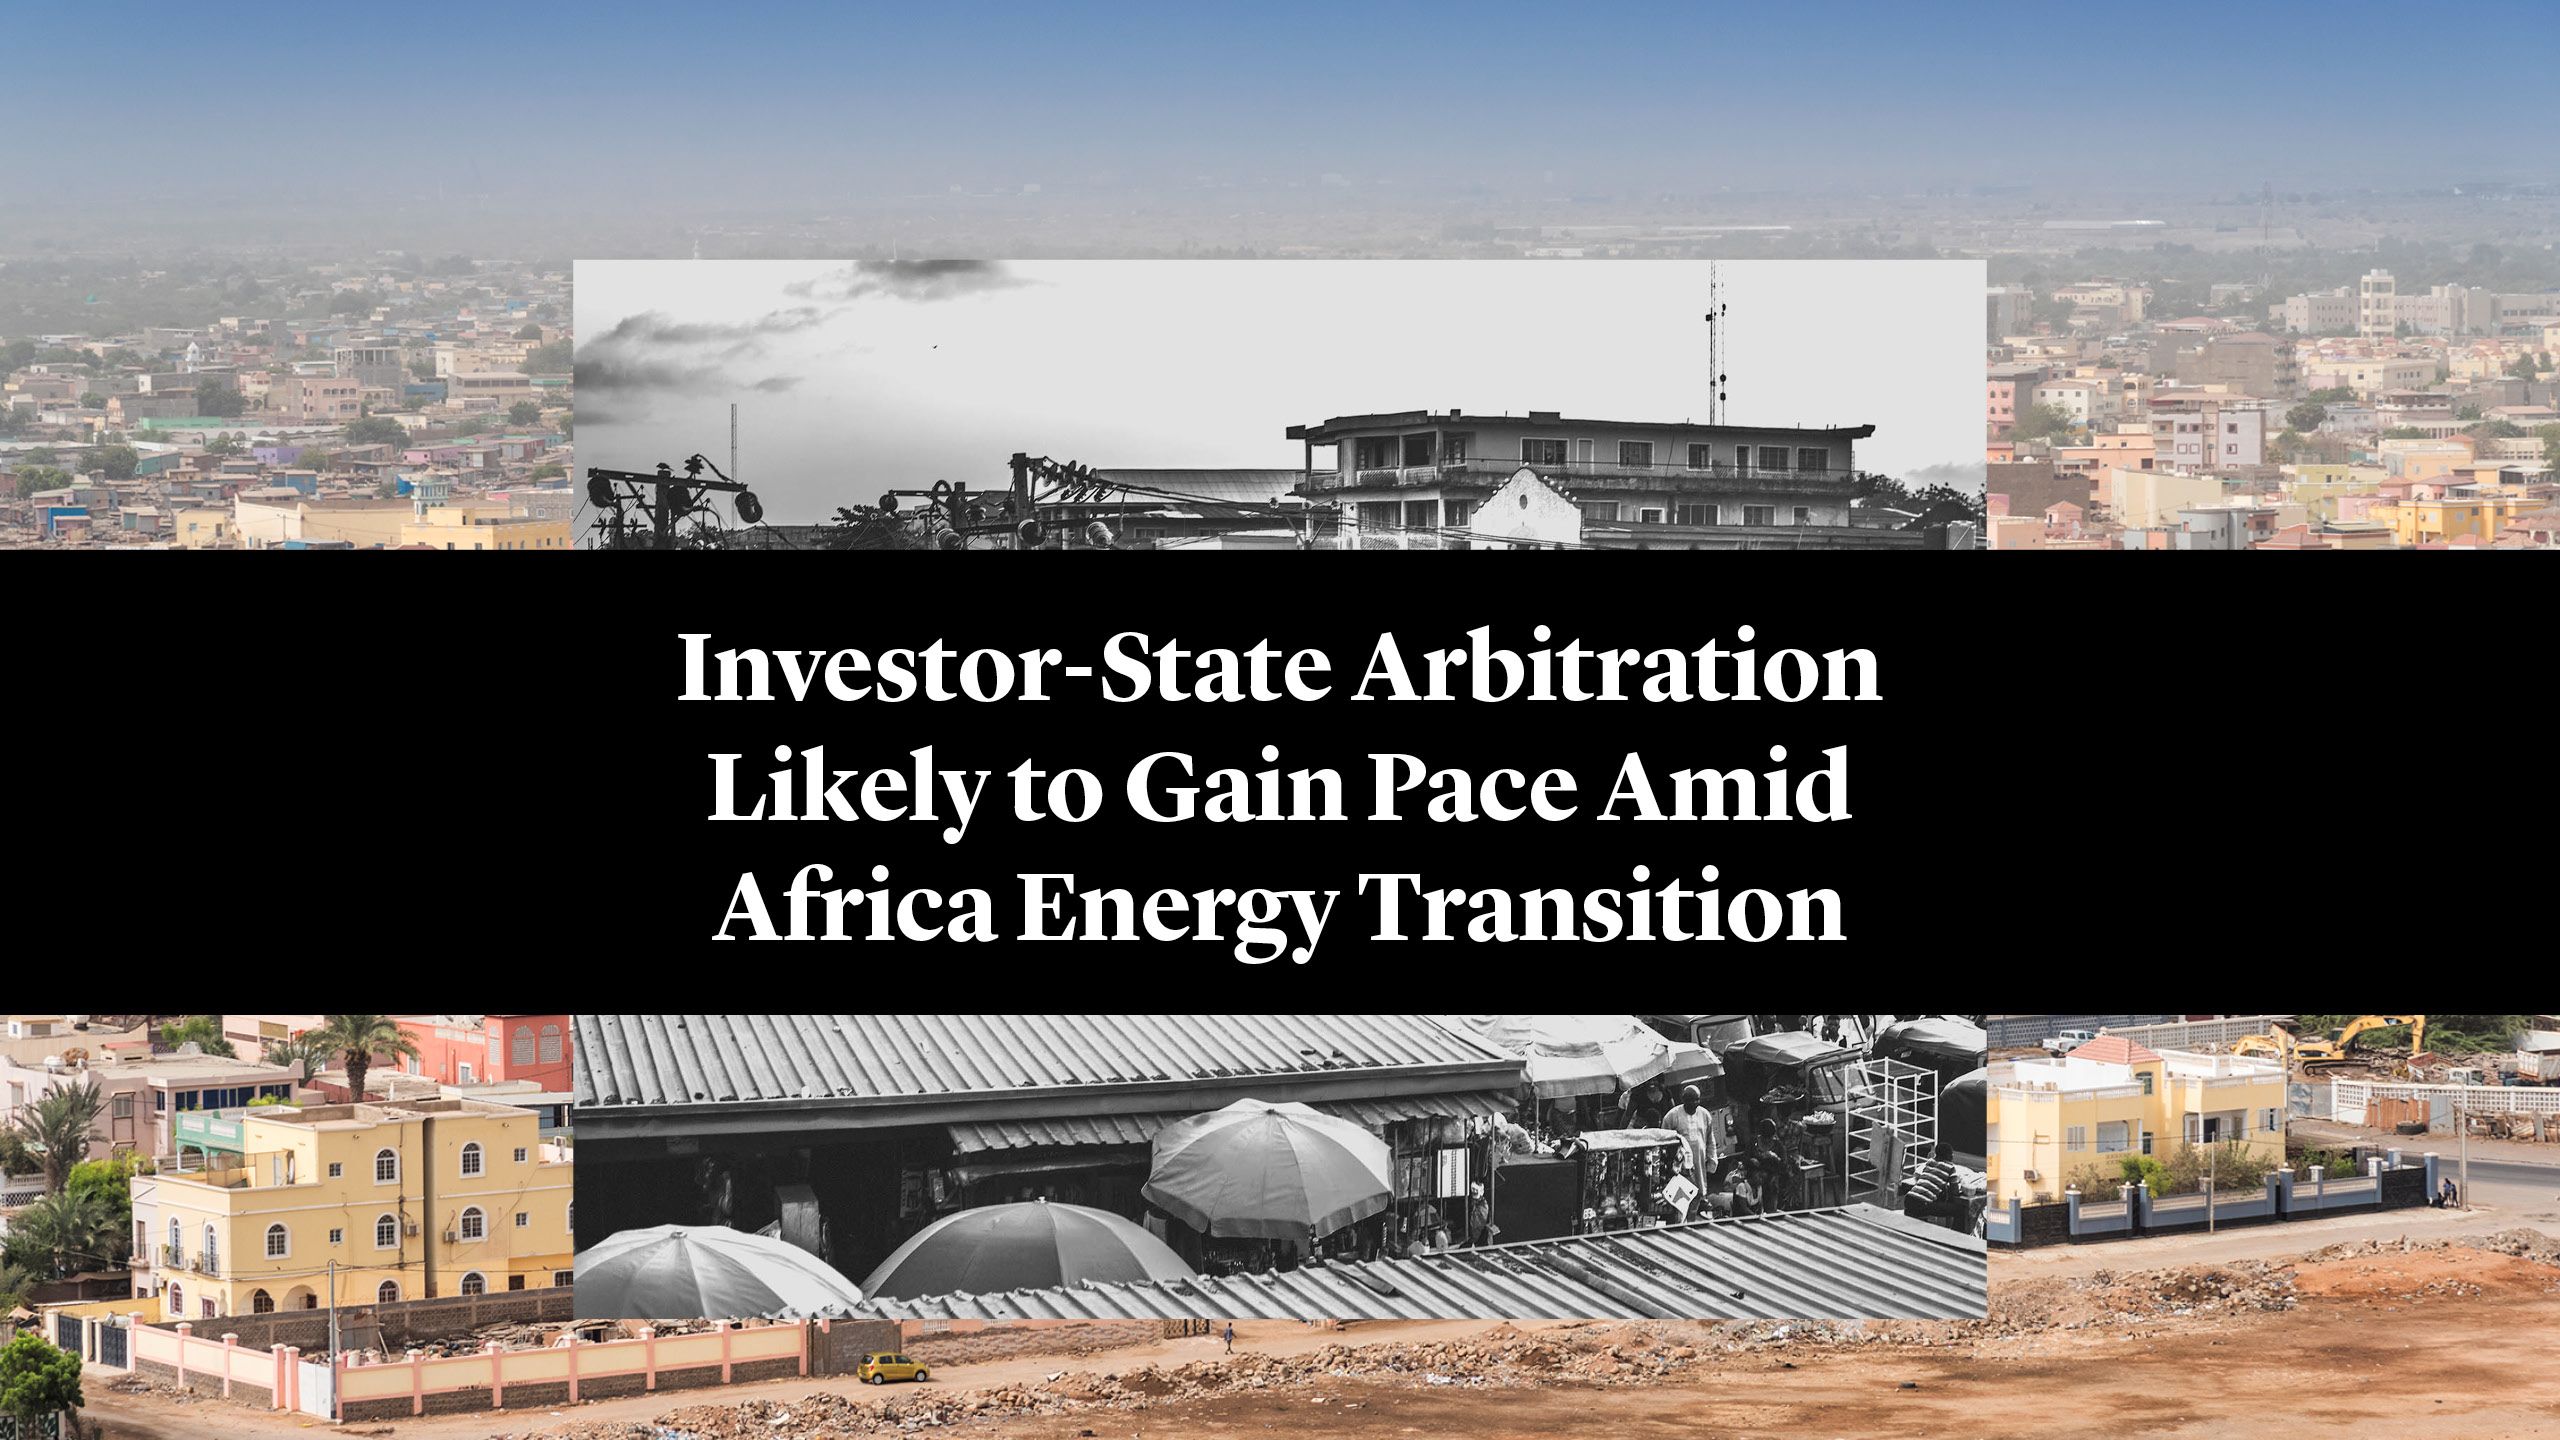 Investor-State Arbitration Likely to Gain Pace Amid Africa Energy Transition